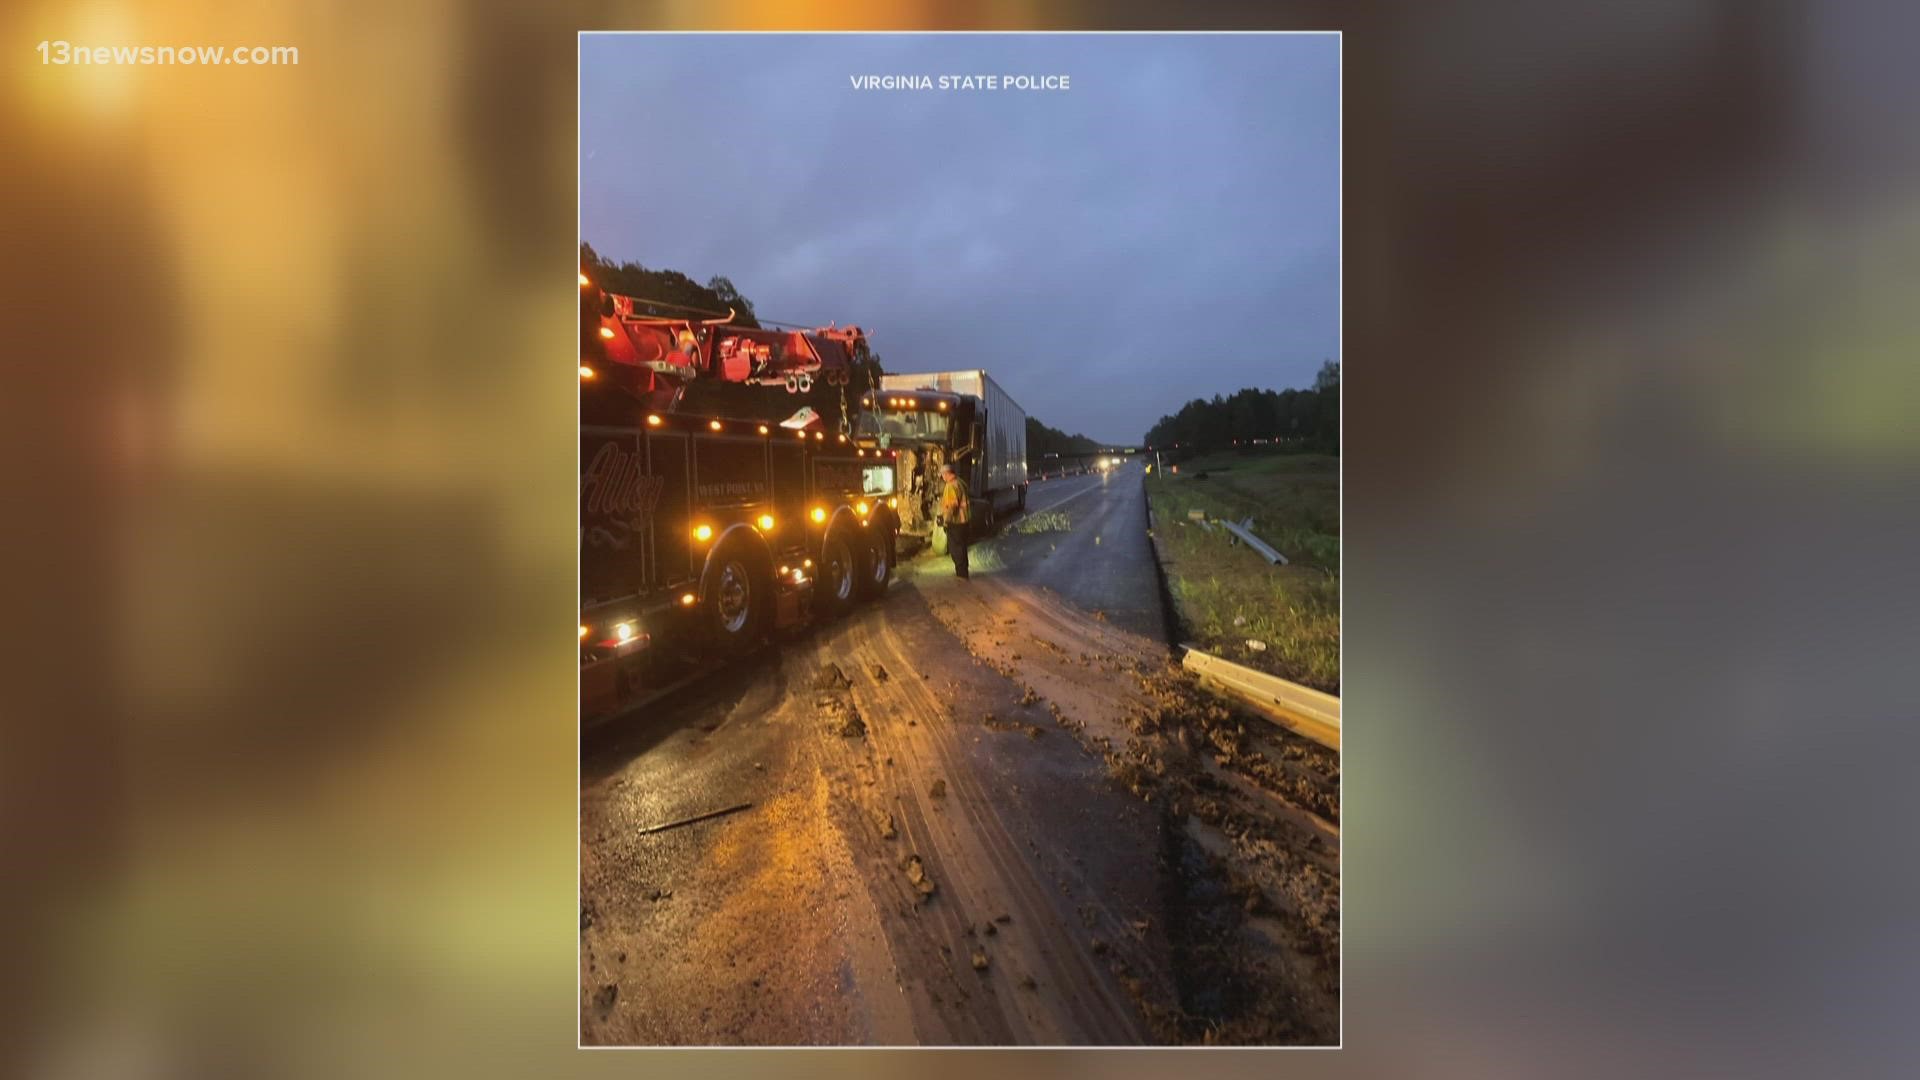 Virginia State Police said a man was charged after crashing a tractor-trailer on I-64 eastbound, in York Co. The vehicle leaked 200 gallons of fuel on the road.